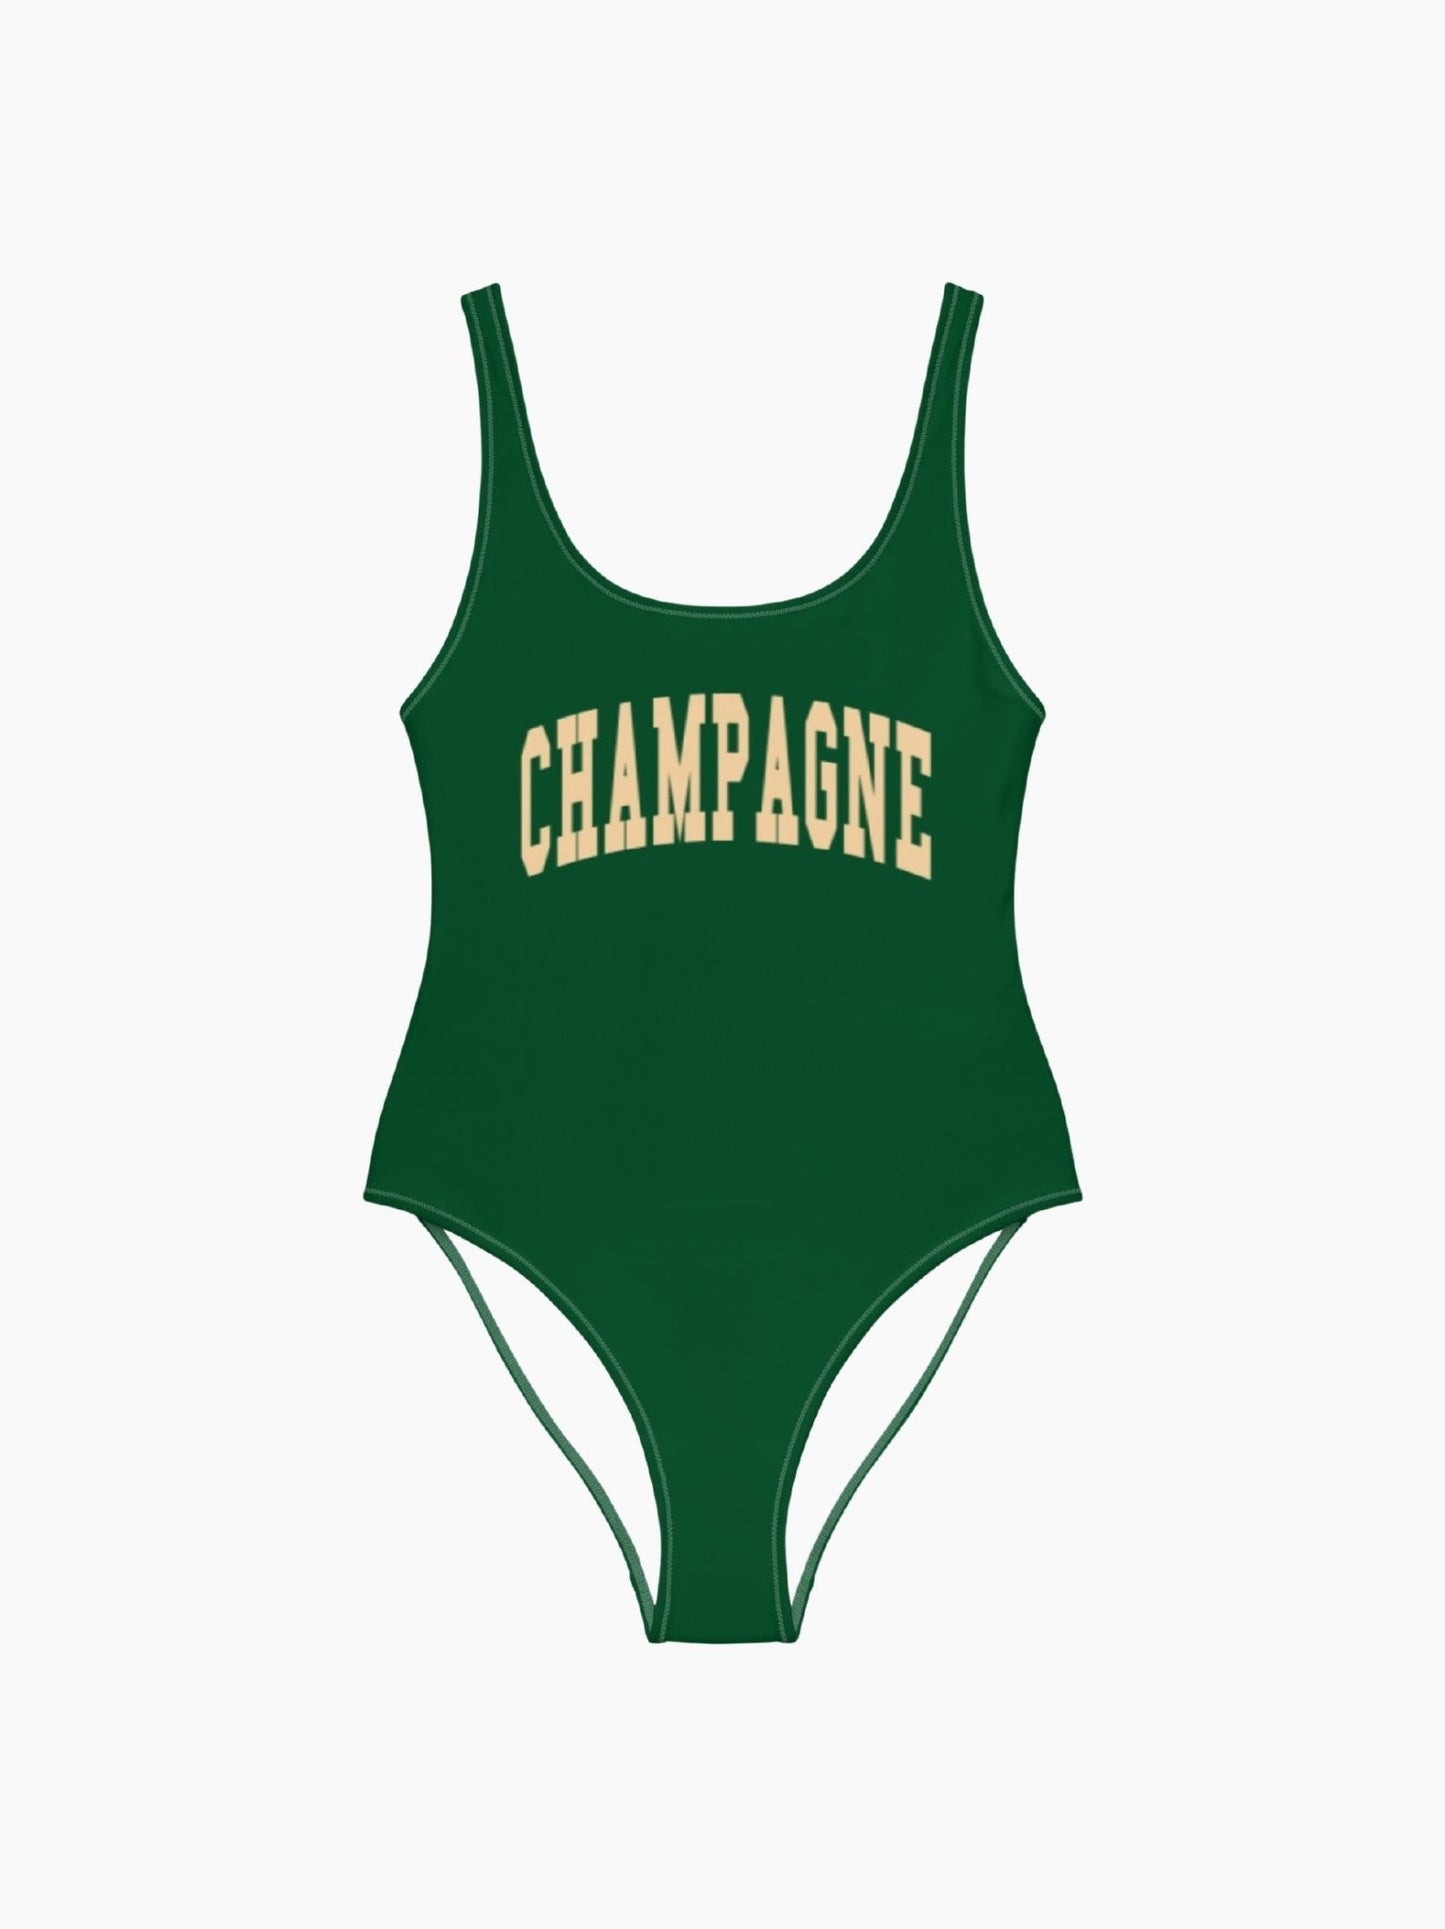 Champagne Swimsuit